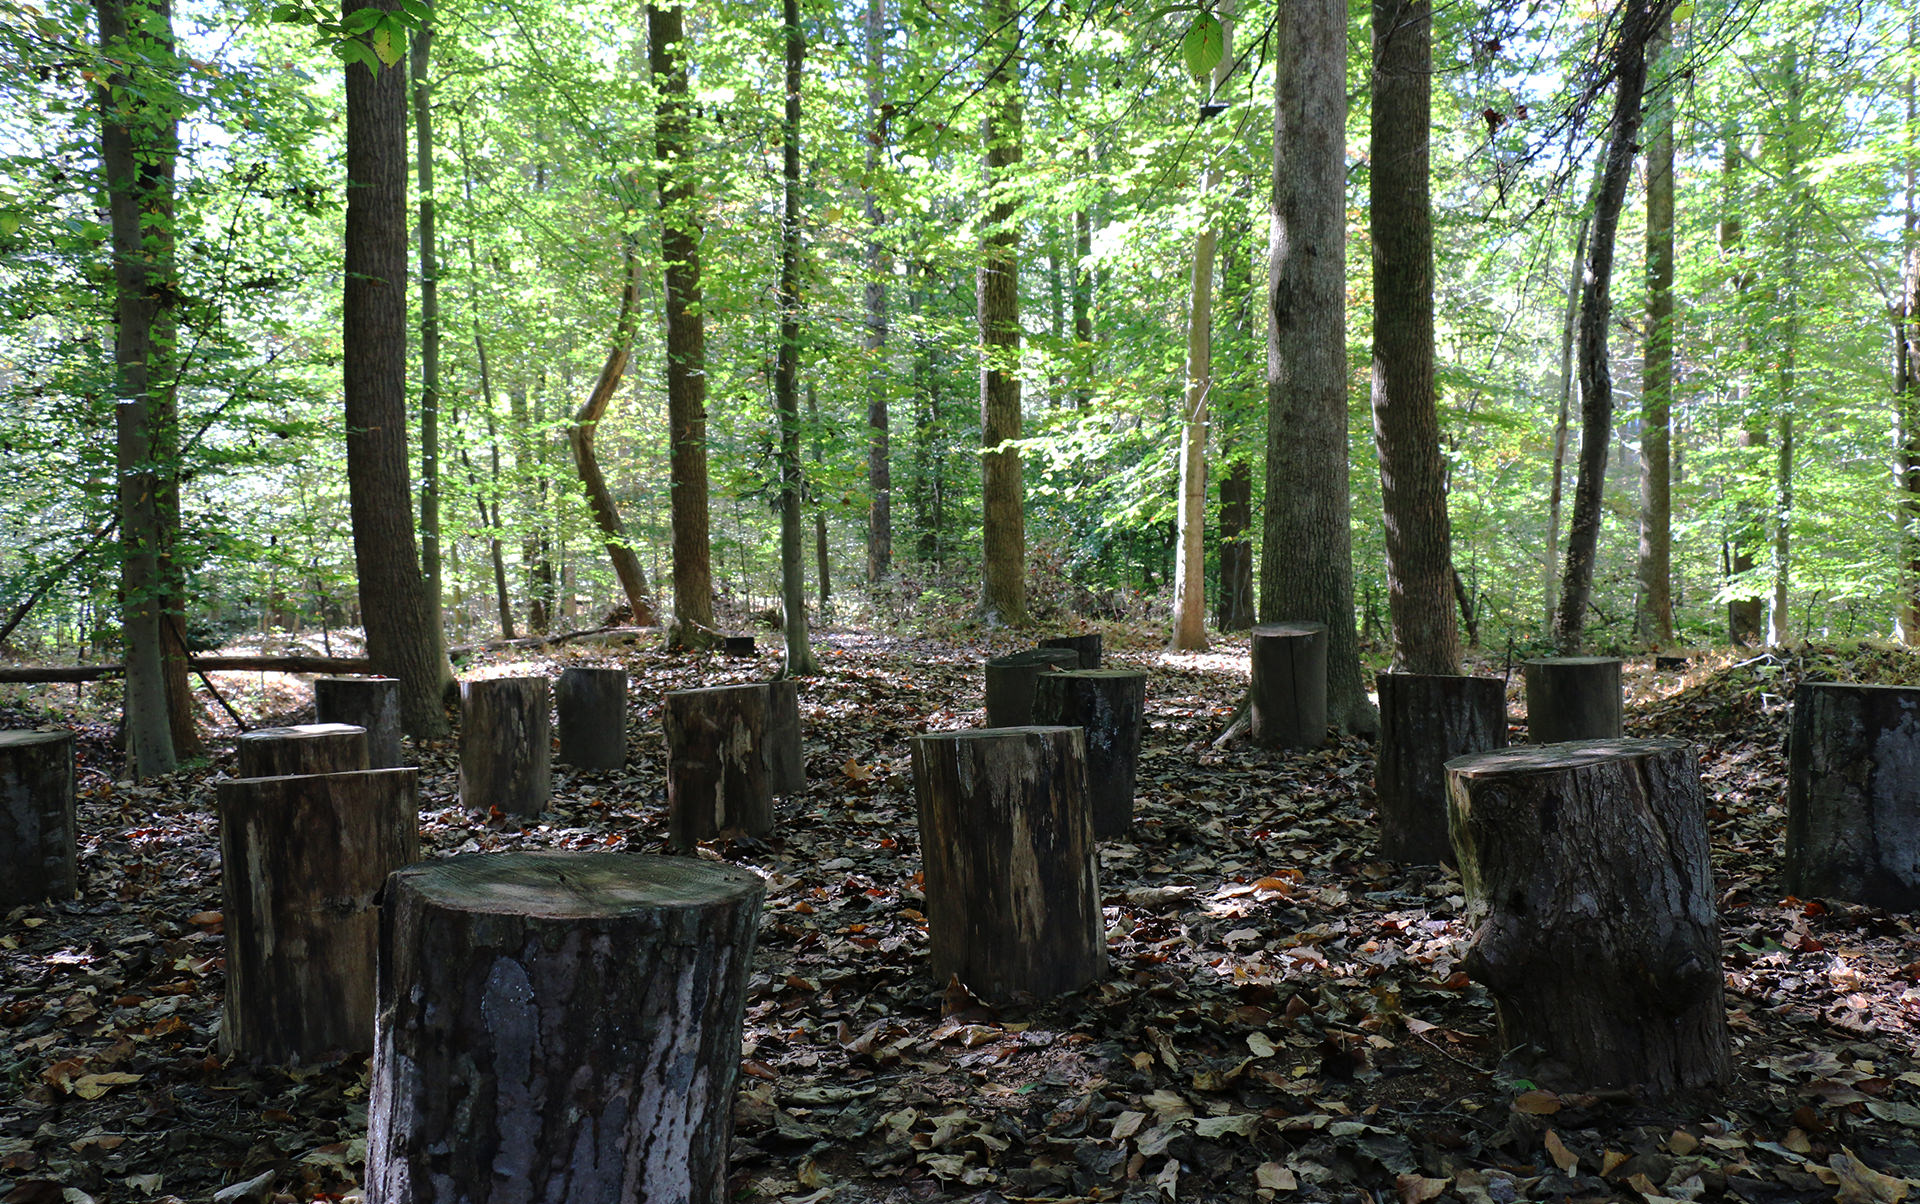 Eighteen tree stumps in the foreground are surrounded by leaves on the ground and leafy green trees in the background.